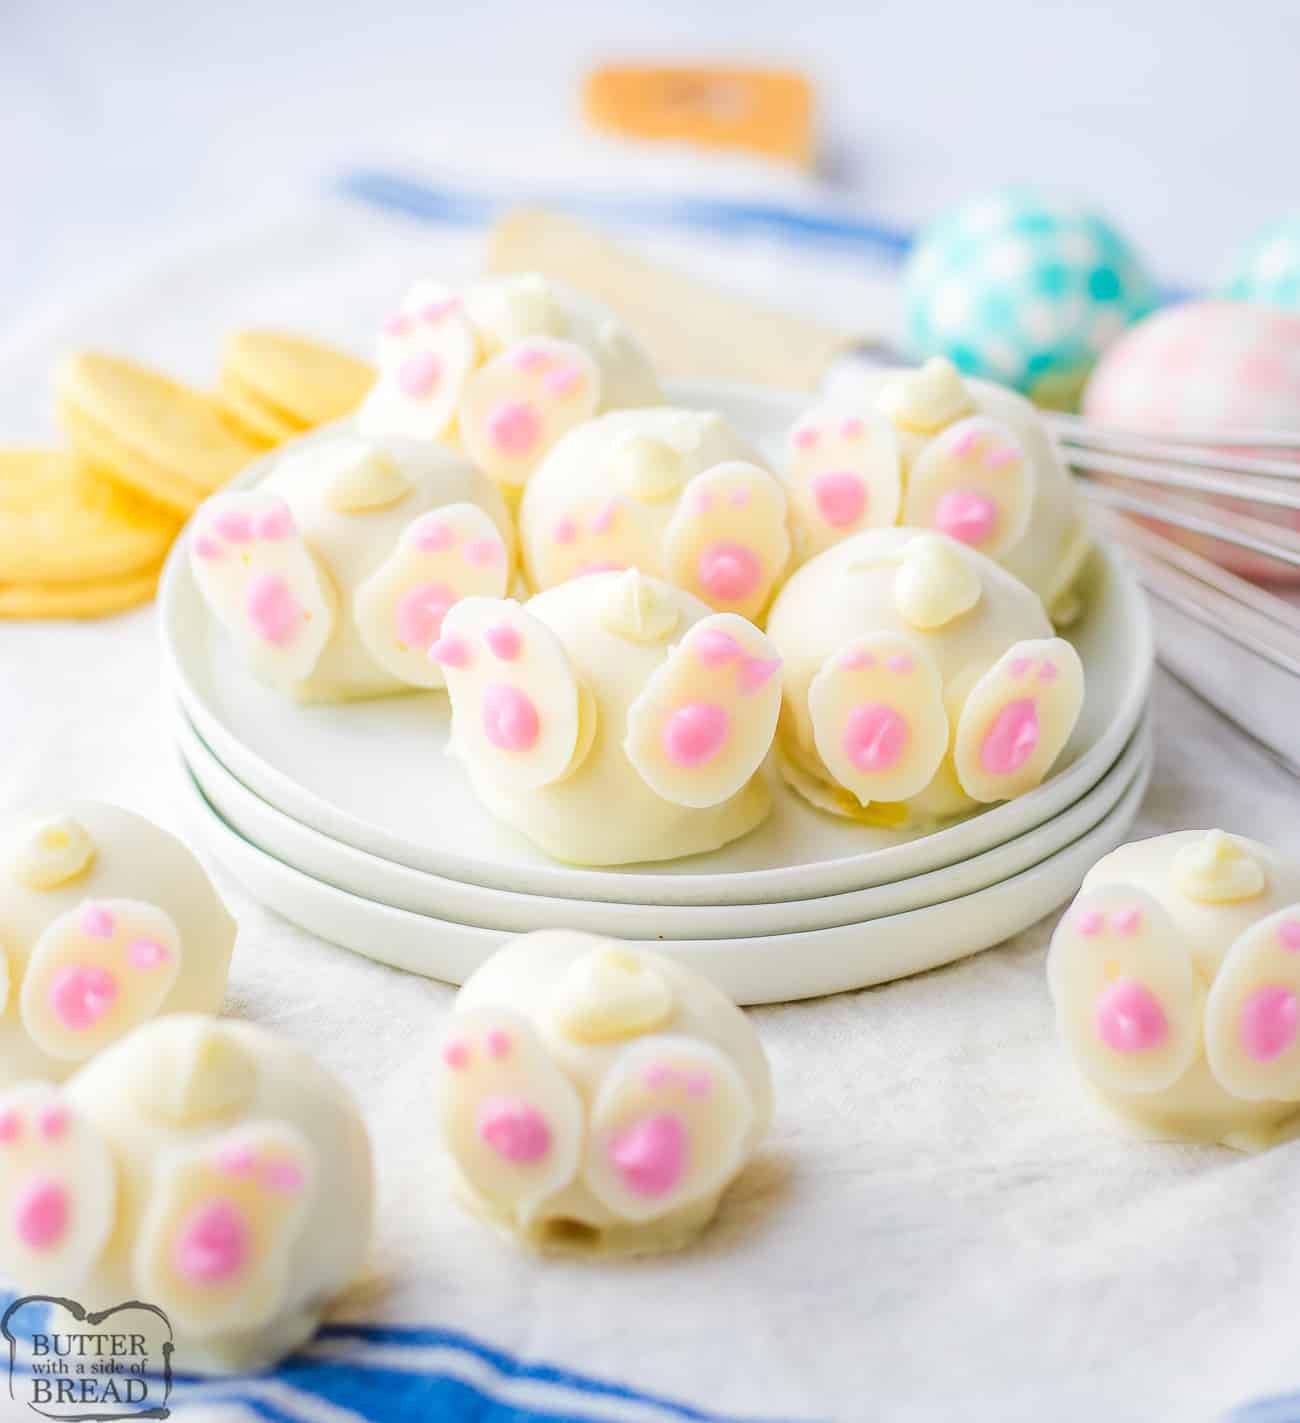 Easter bunny oreo balls with bunny bums and feet